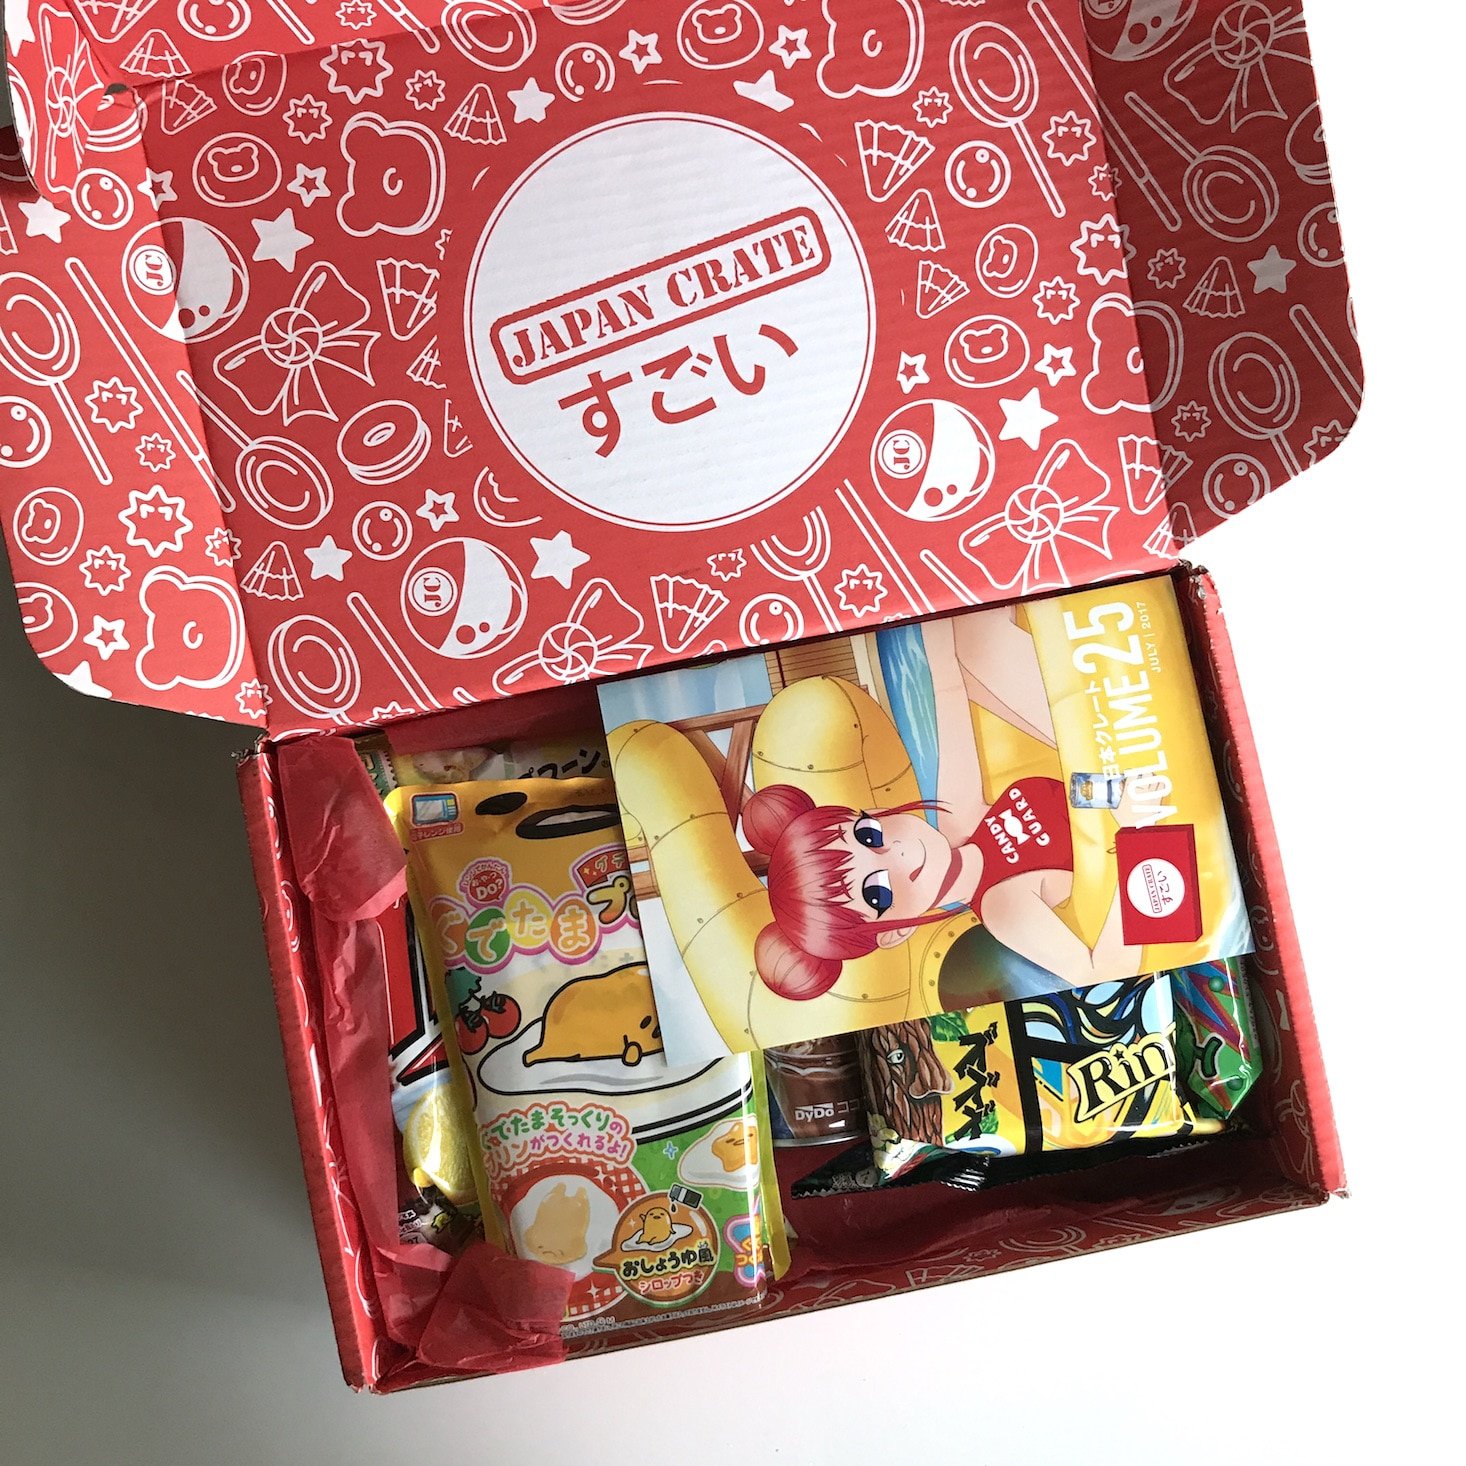 Japan Crate Subscription Box Review + Coupon – July 2017